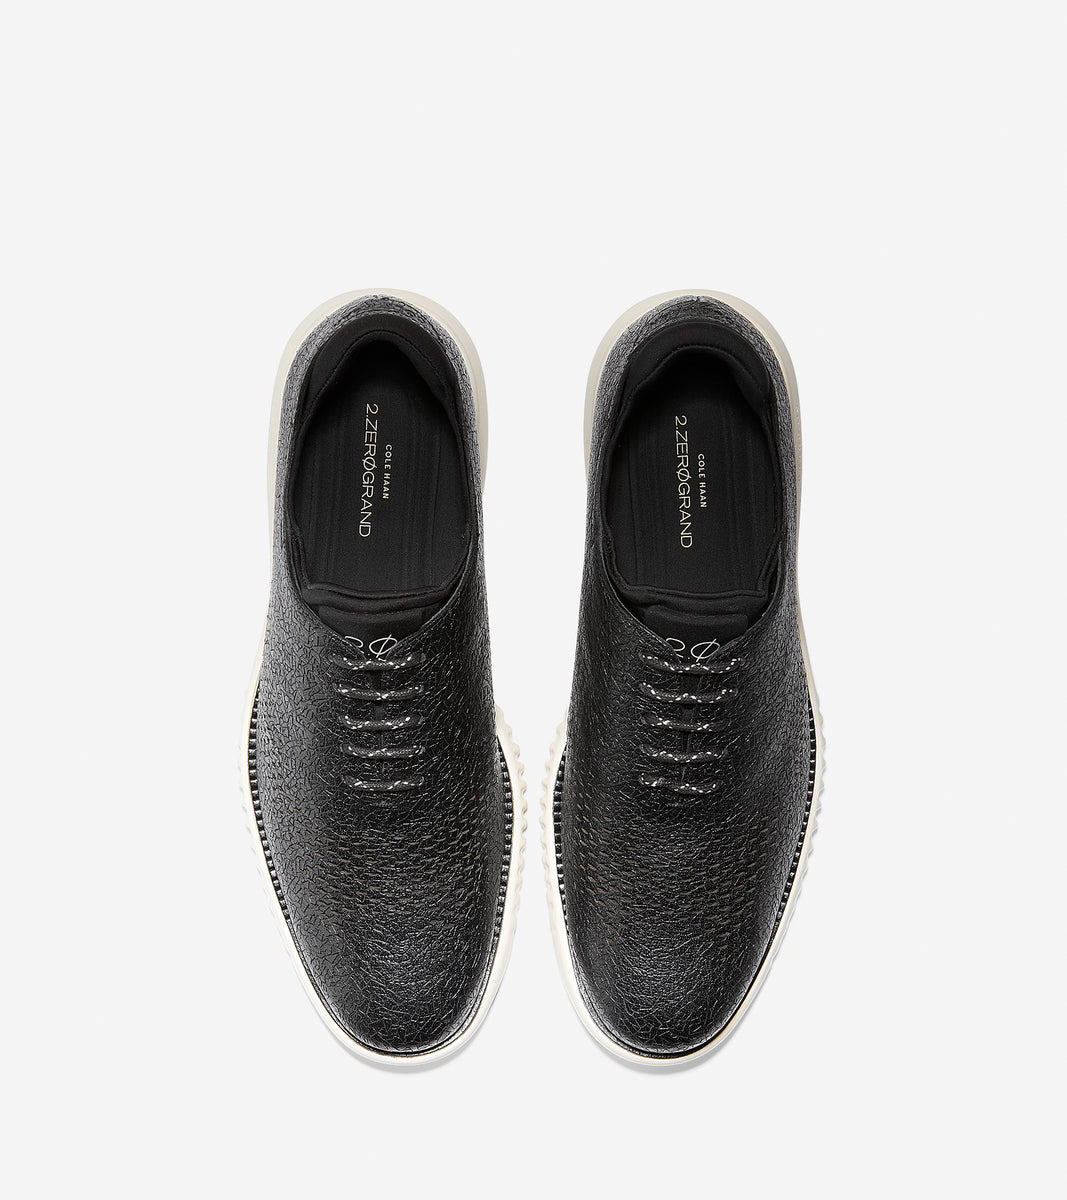 ColeHaan-2.ZERØGRAND Lined Laser Wingtip Oxford-c28587-Black Textured Leather-ivory